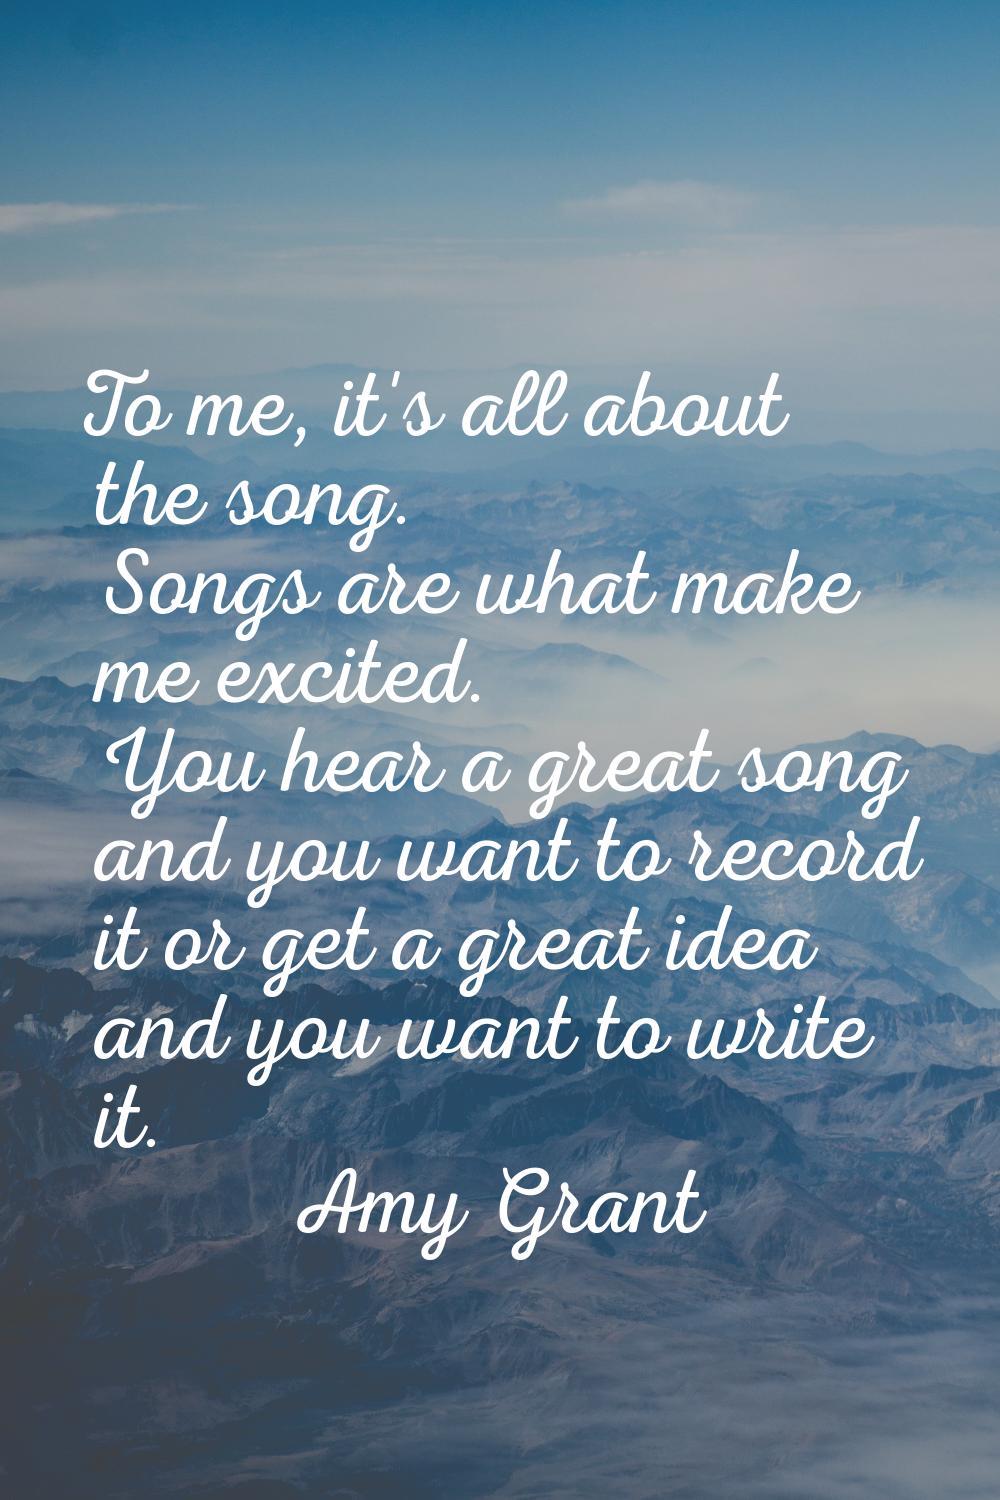 To me, it's all about the song. Songs are what make me excited. You hear a great song and you want 